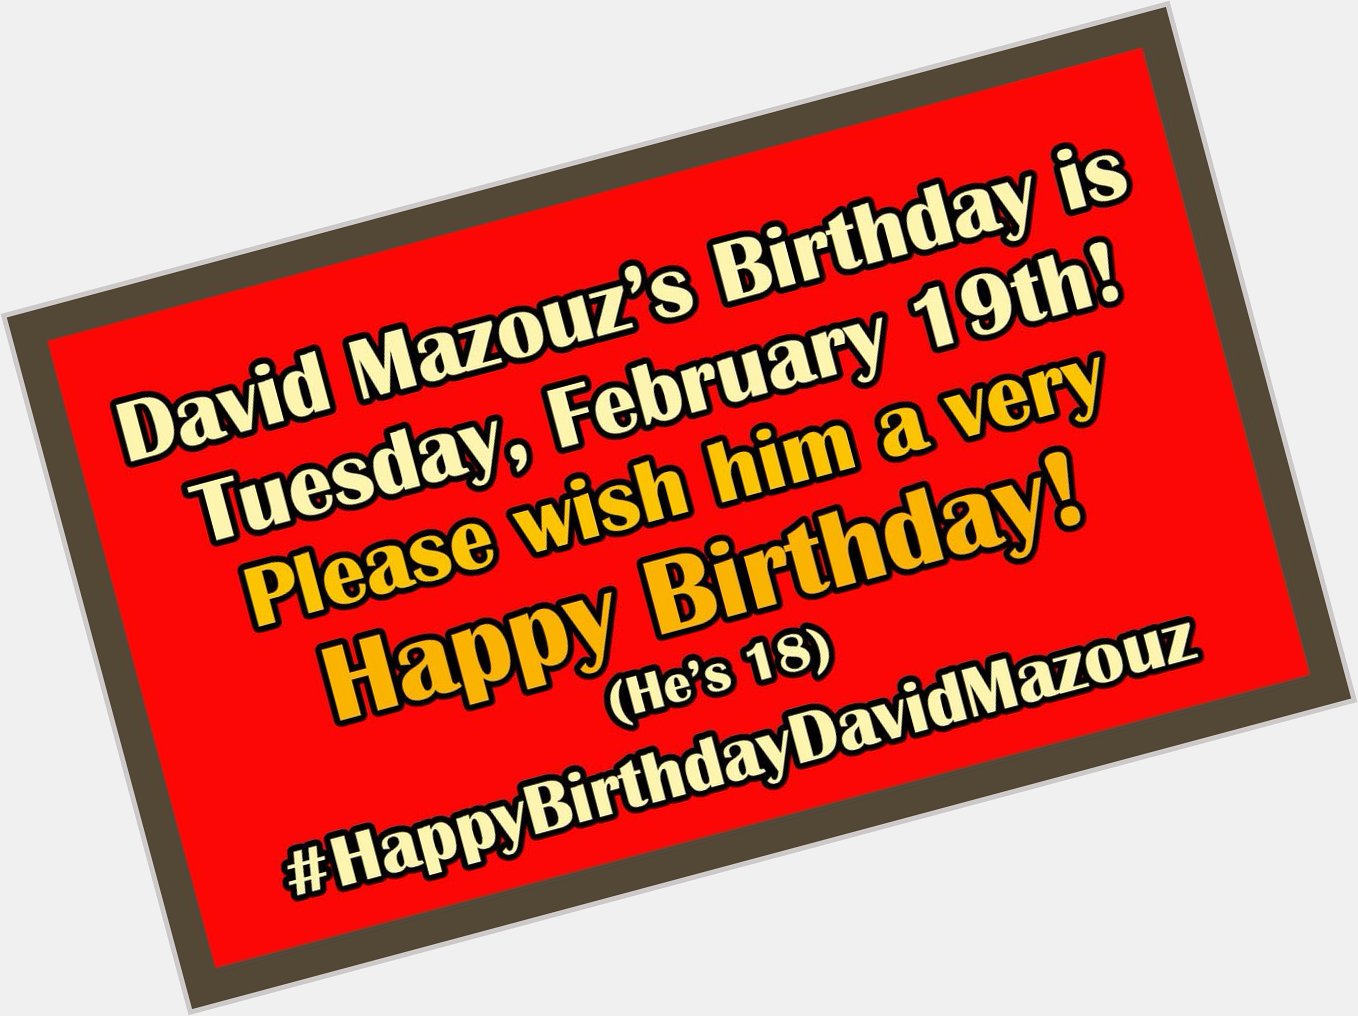 Be sure to wish David Mazouz a Happy Birthday on this Tuesday! He\s going to be 18. 